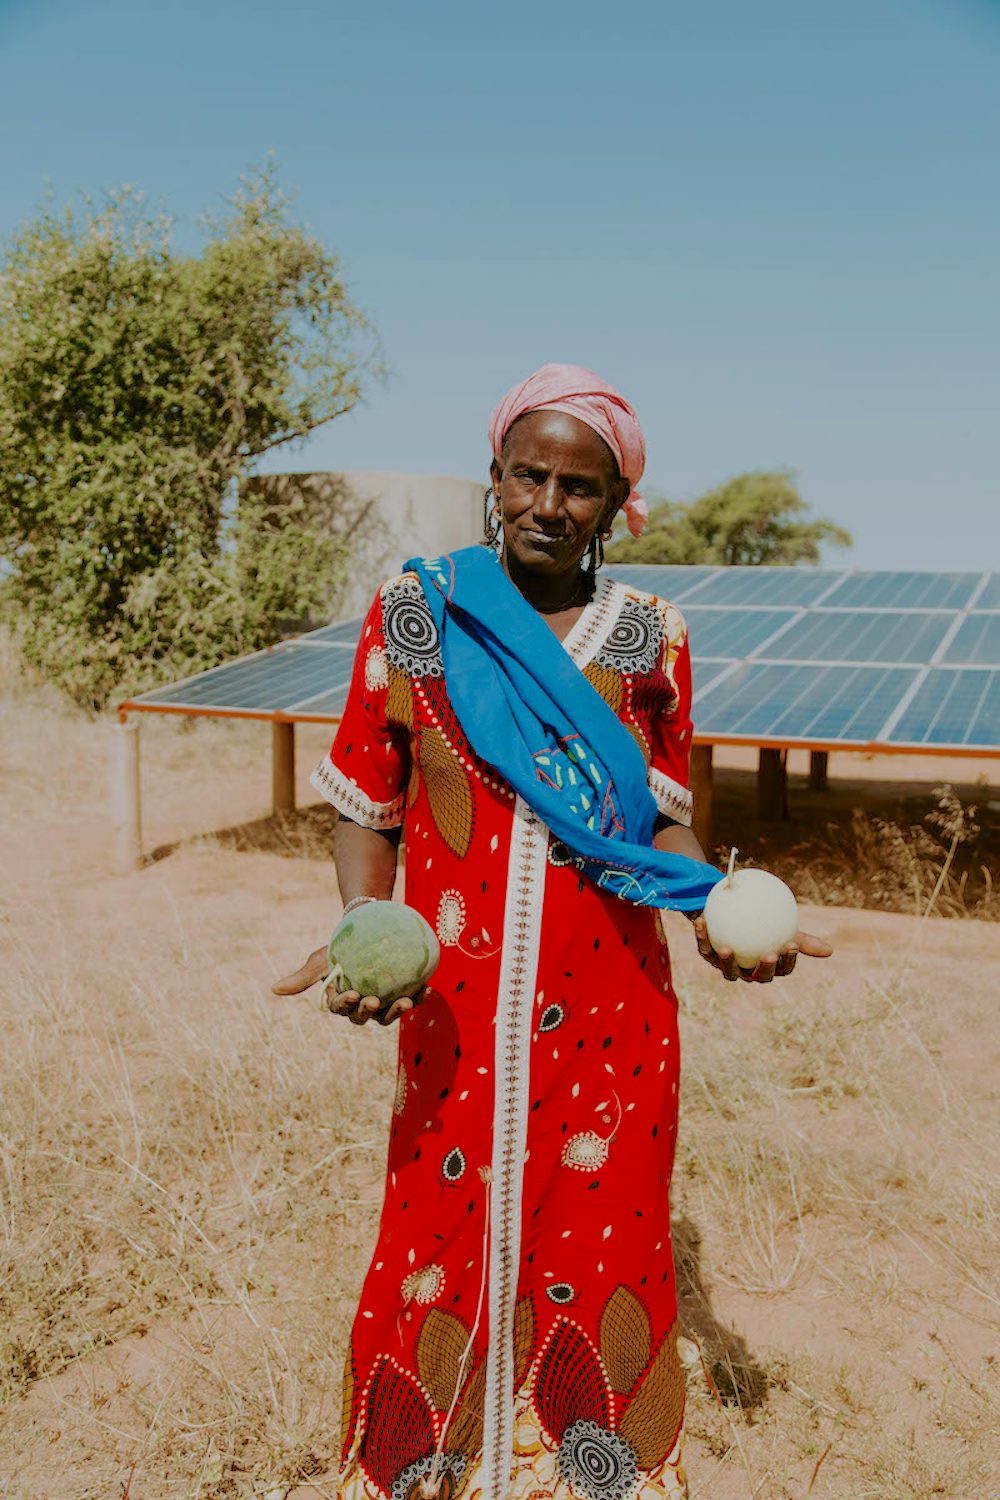 Penda Sow stands in front of the solar panels that power the water pump at a community garden tended by the women of Younoufere. Photo by Lacey West.